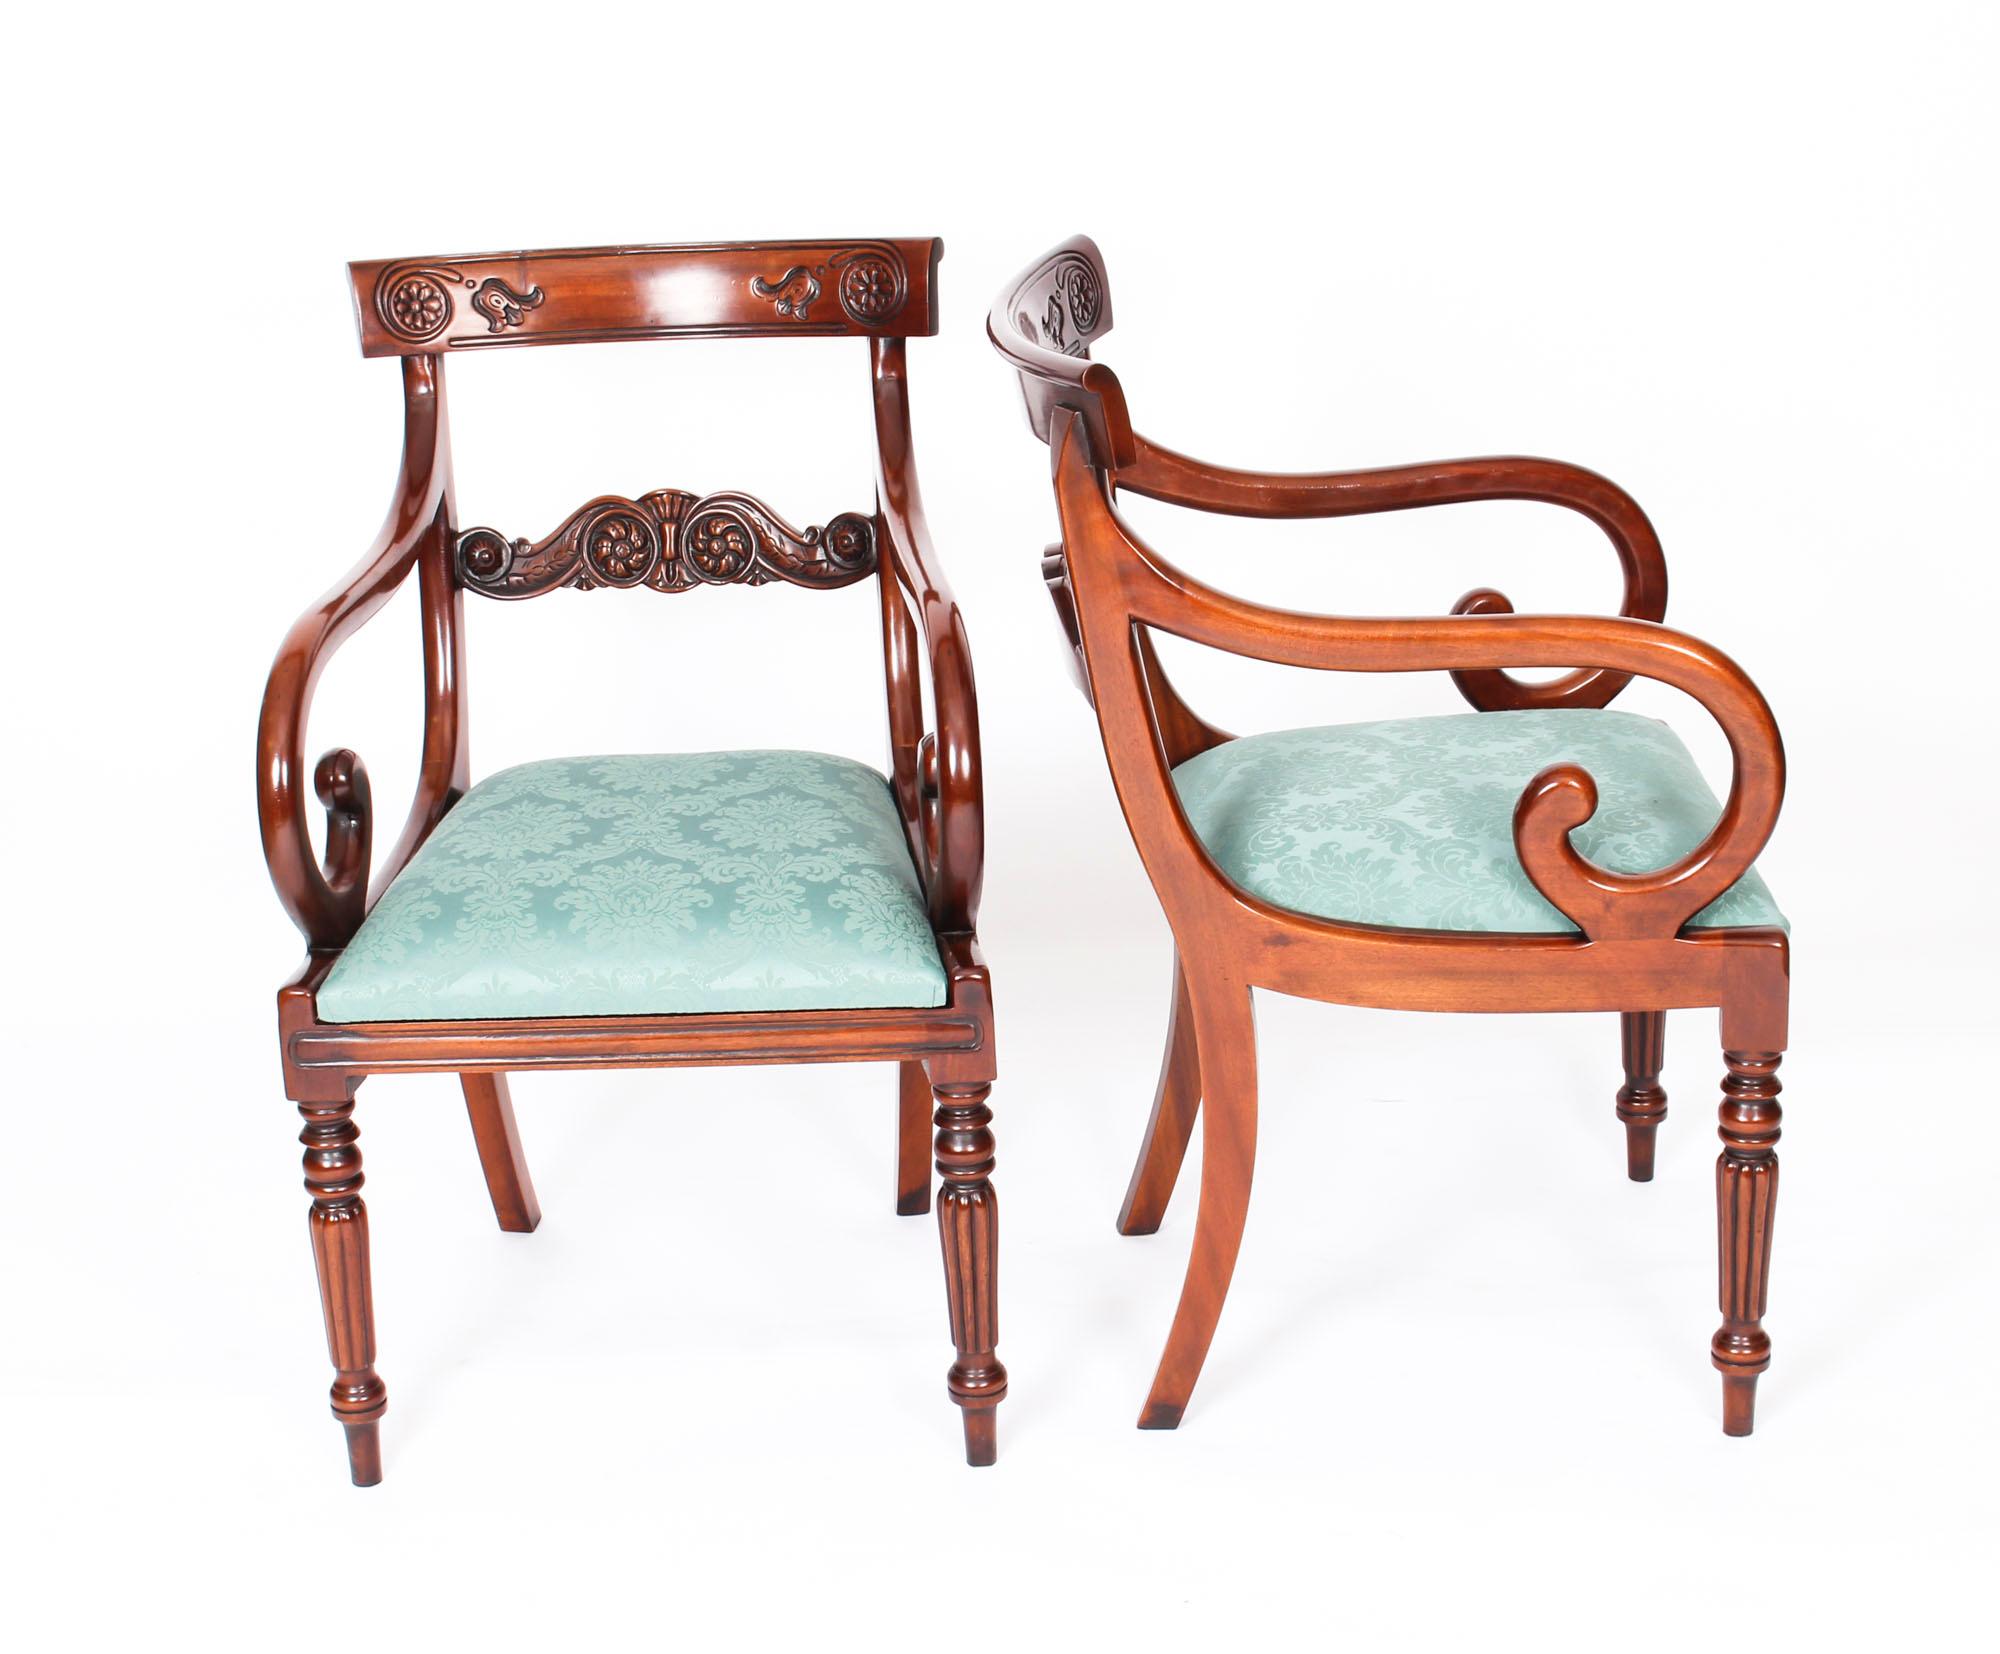 An absolutely fantastic Vintage set of fourteen Regency Revival Bar Back dining chairs dating from the late 20th century.

Masterfully hand crafted in beautiful solid flame mahogany, the finish and attention to detail on display are truly